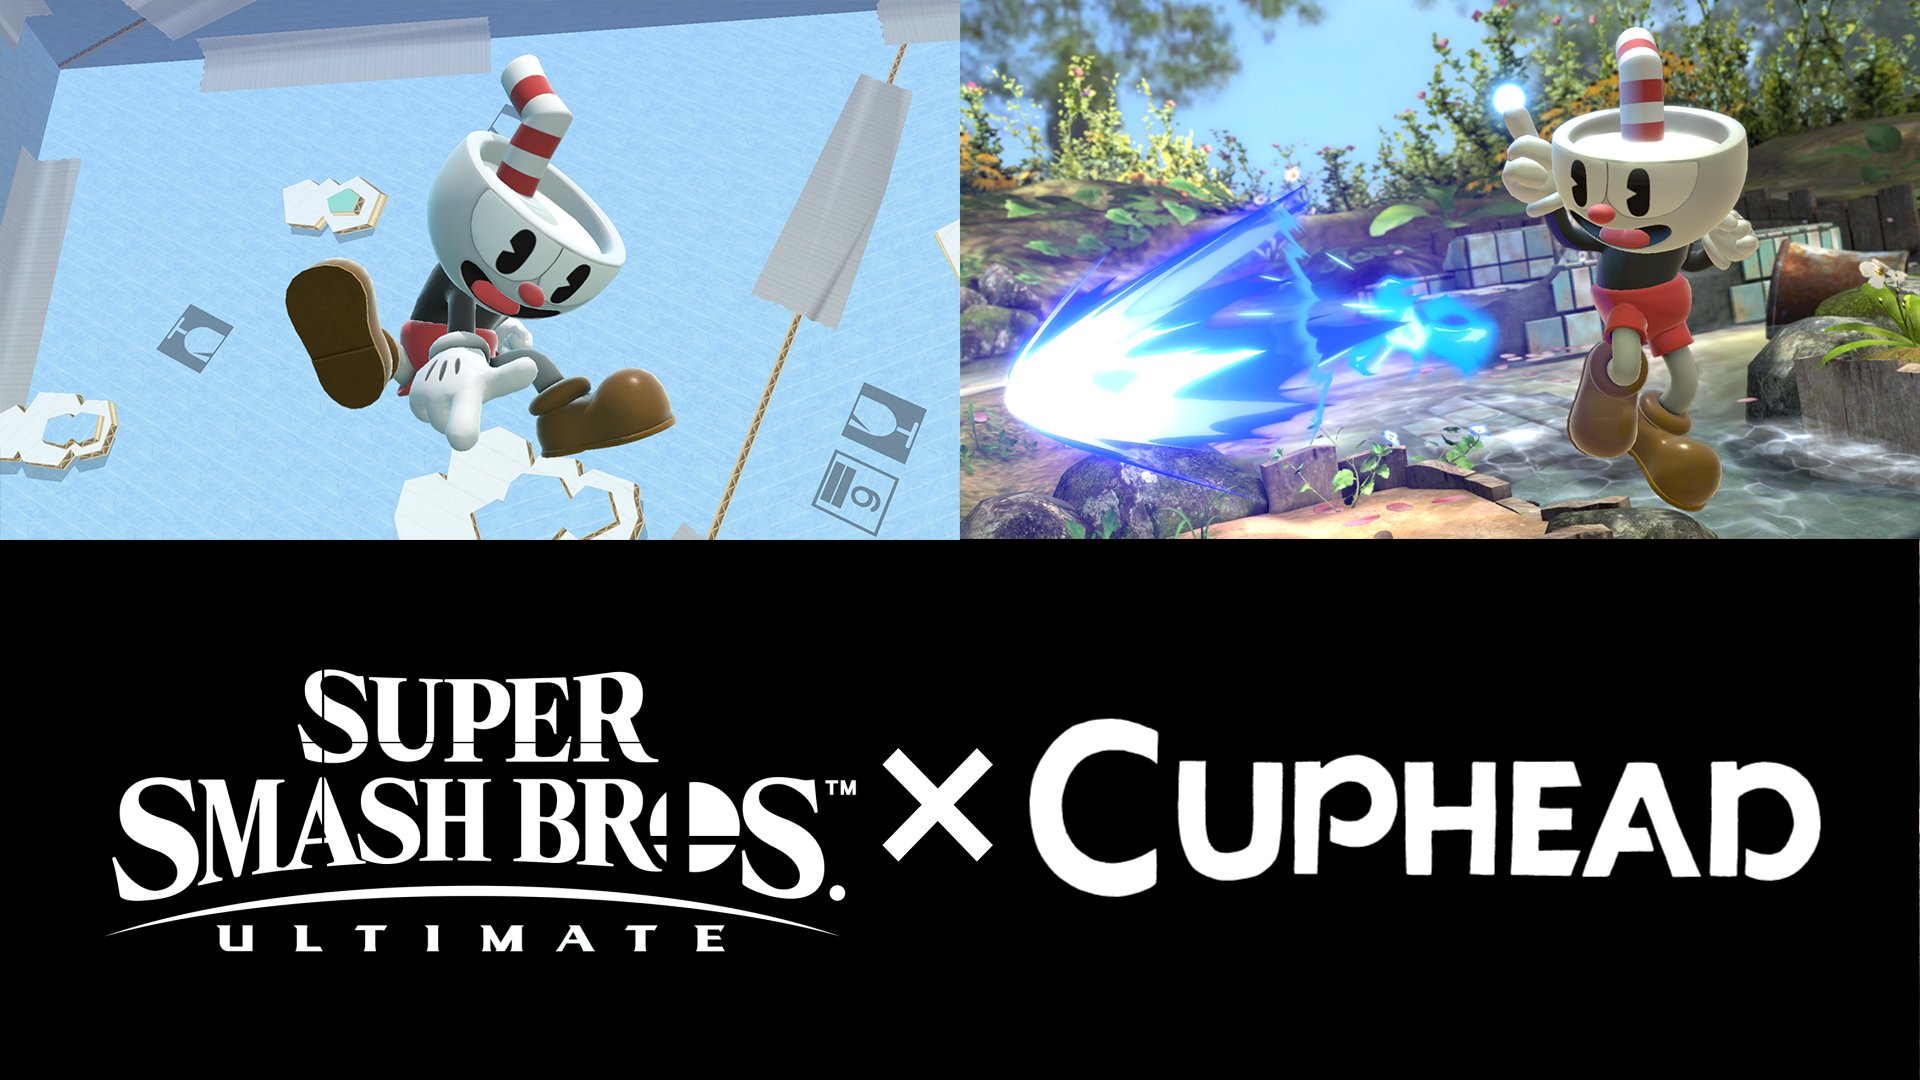 Studio MDHR shares kind words on Cuphead’s inclusion in Smash Bros. Ultimate